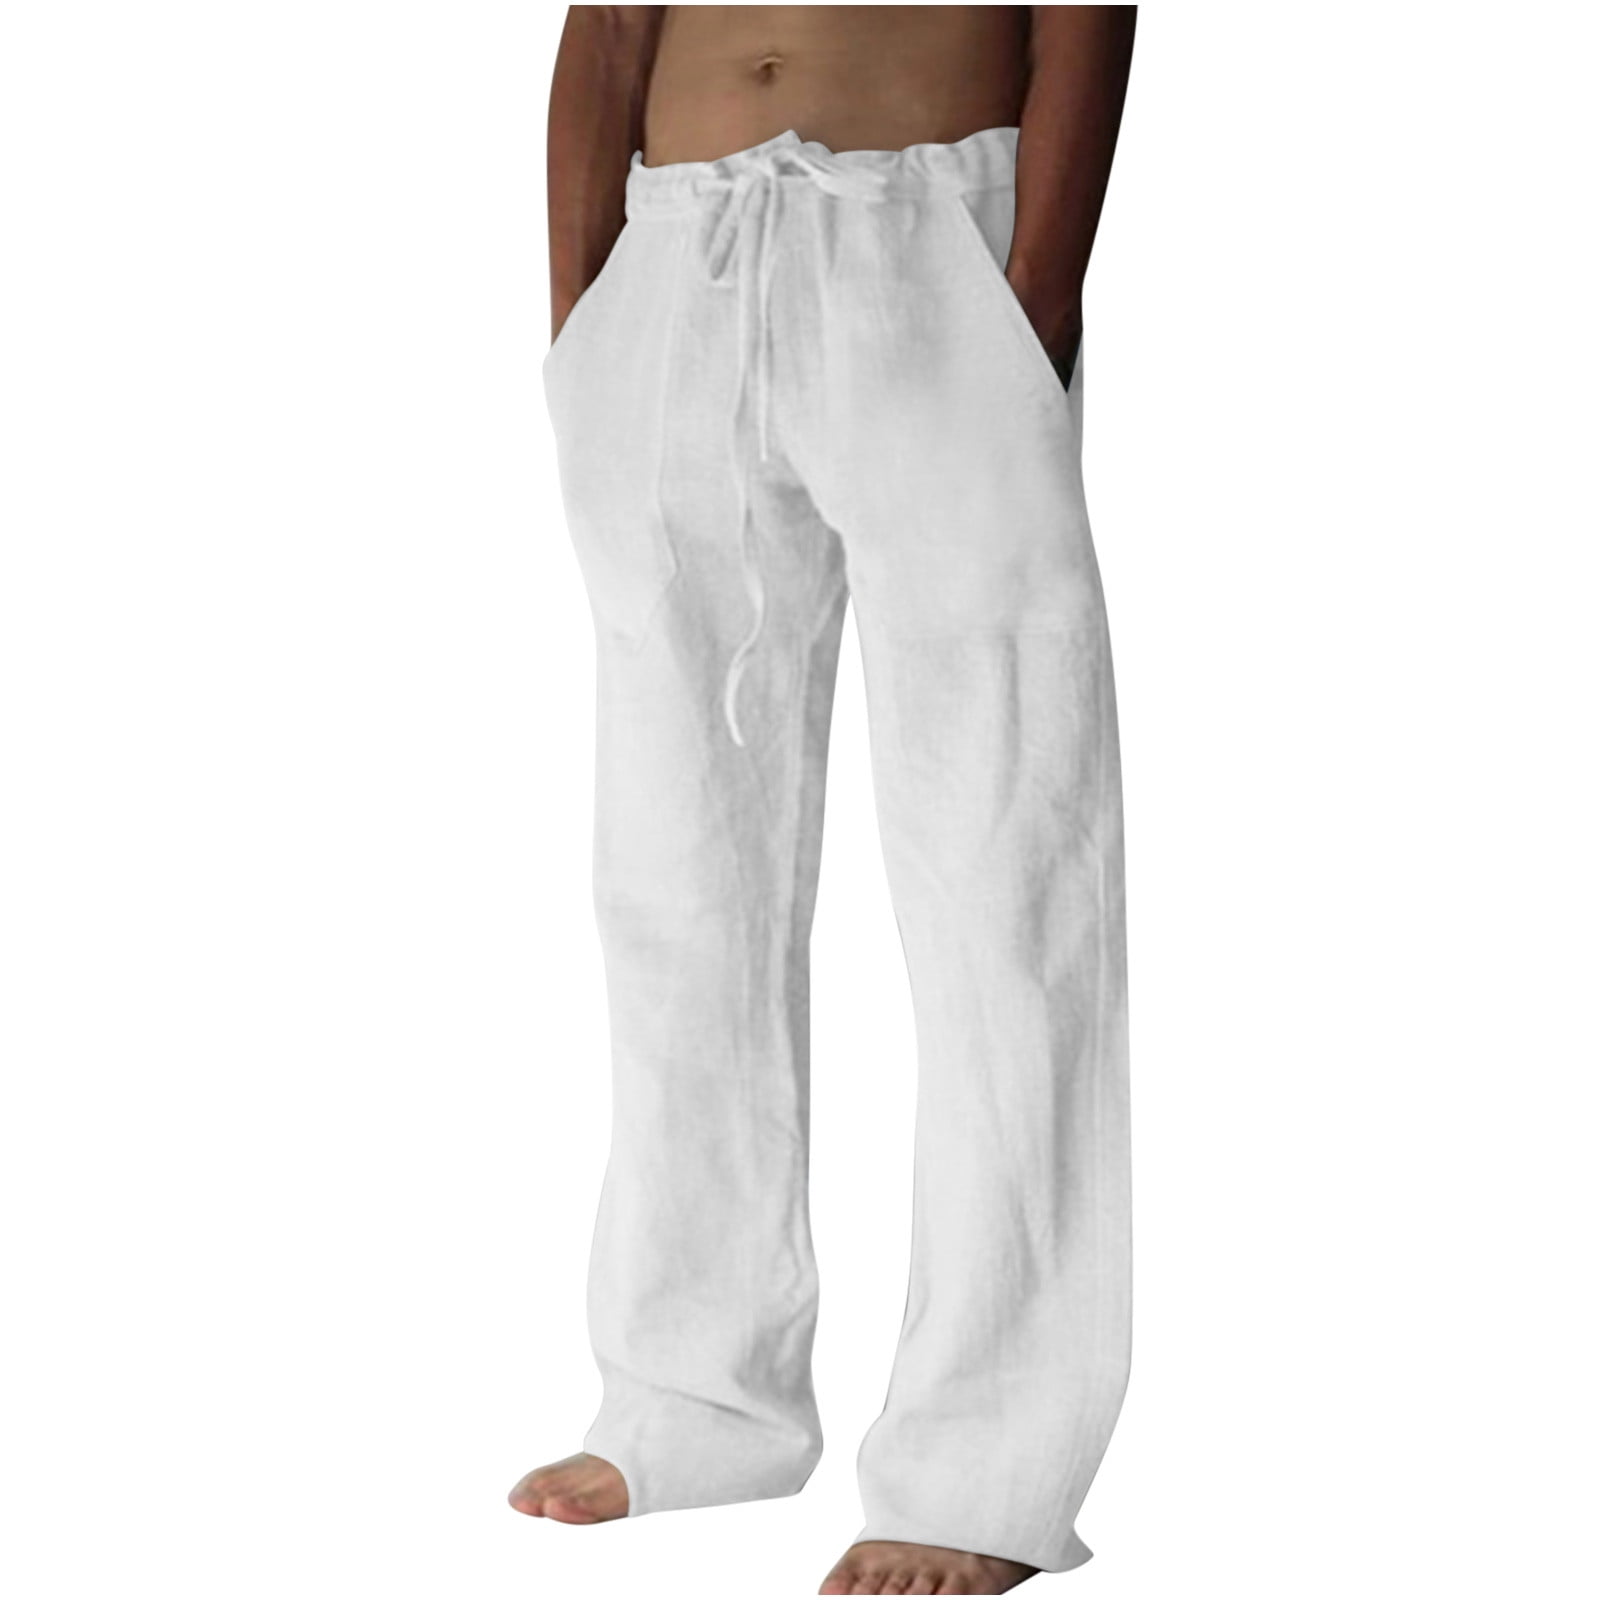 Aoochasliy Crgo Pants for Men Clearance Mens Cotton and Linen Elastic  Waist Blended Breathable Comfortable Soft Beach Casual Trousers Full Length  Pants  Walmartcom